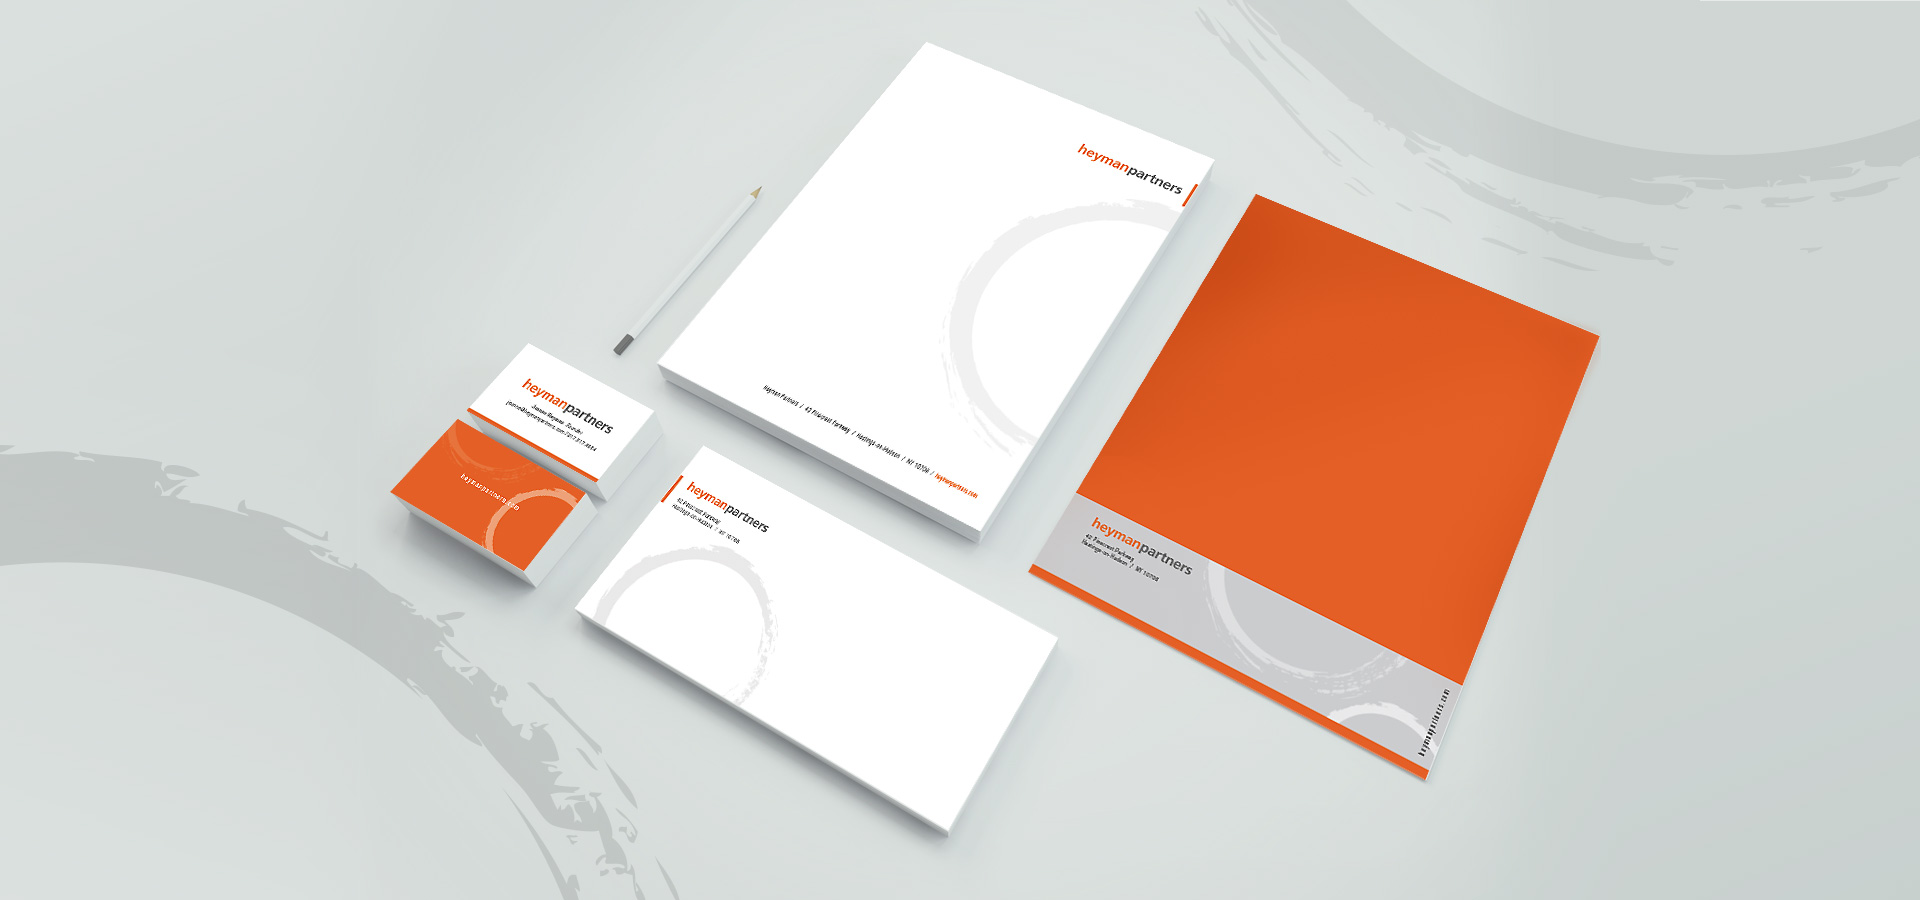 orange and gray tone stationery design including business card, letterhead, envelope and business folder for heyman partners